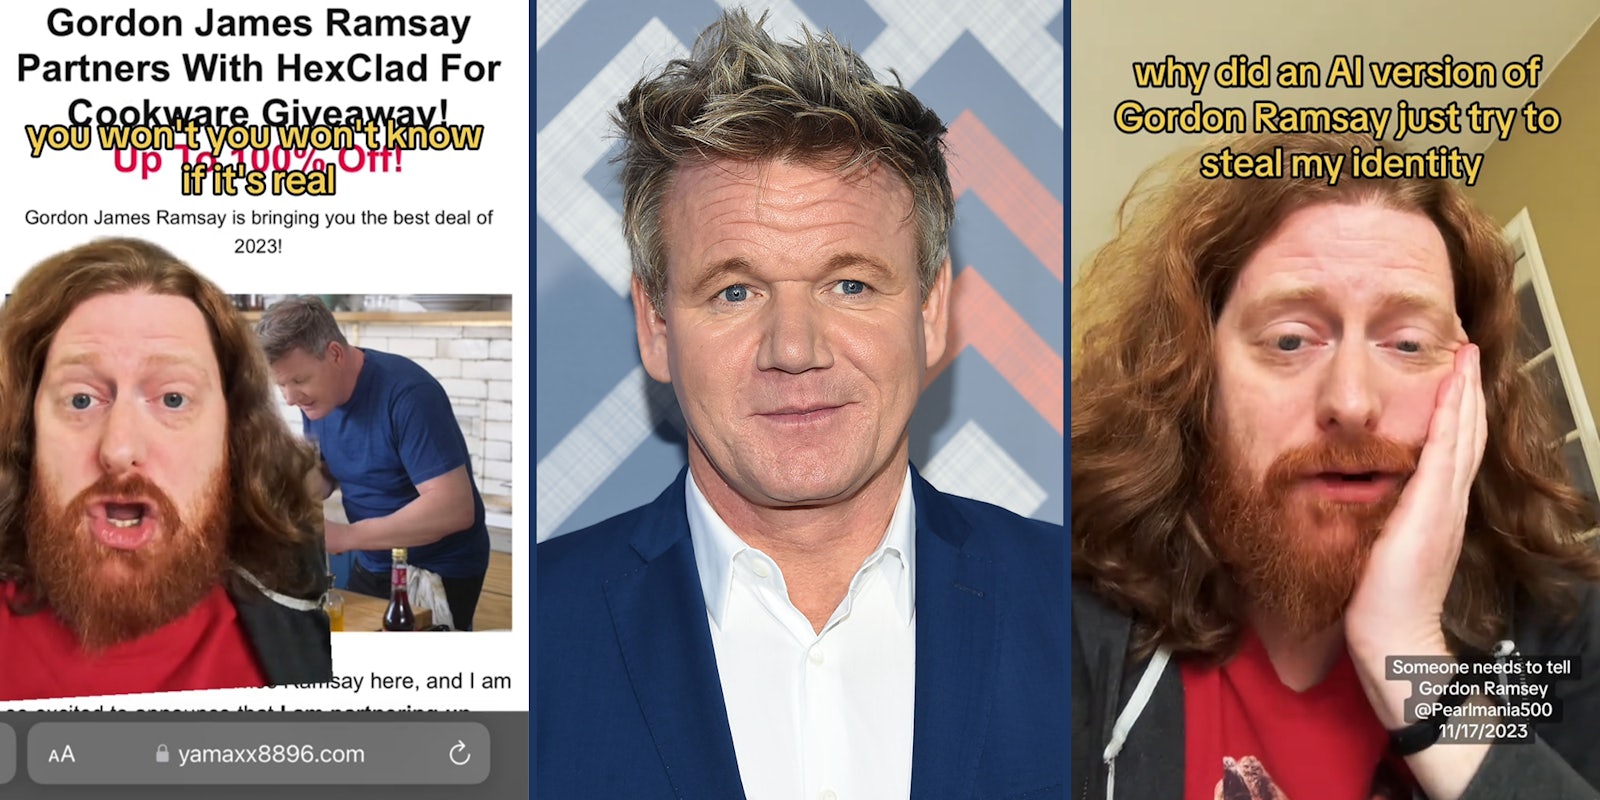 Customer says AI version of Gordon Ramsey is being used to steal people’s identities